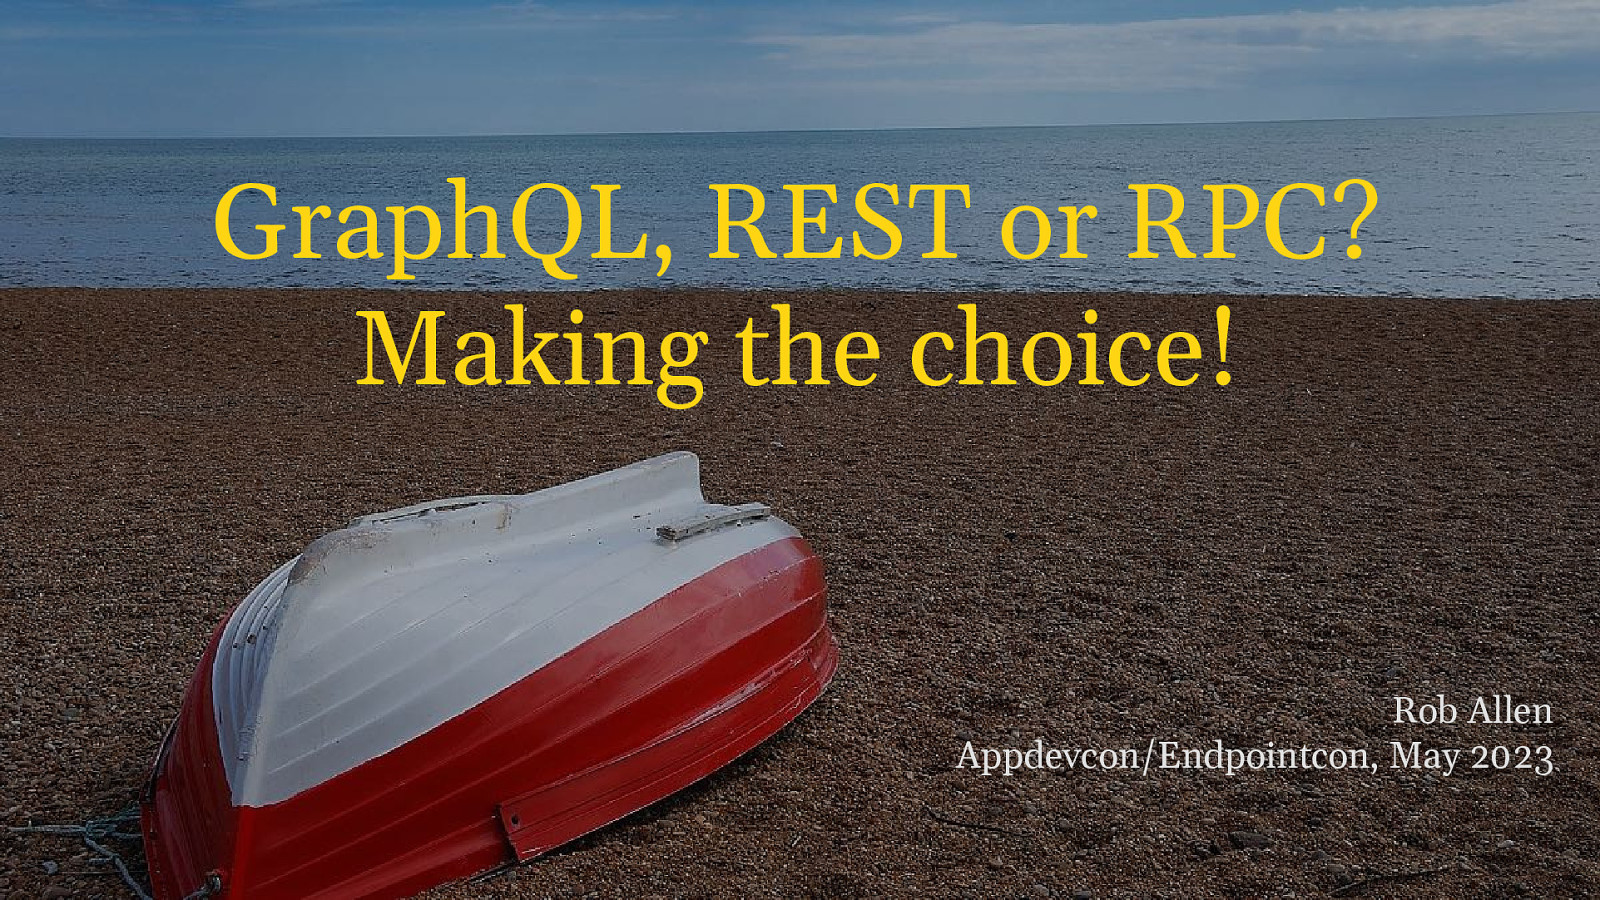 GraphQL, REST or RPC? Making the choice!